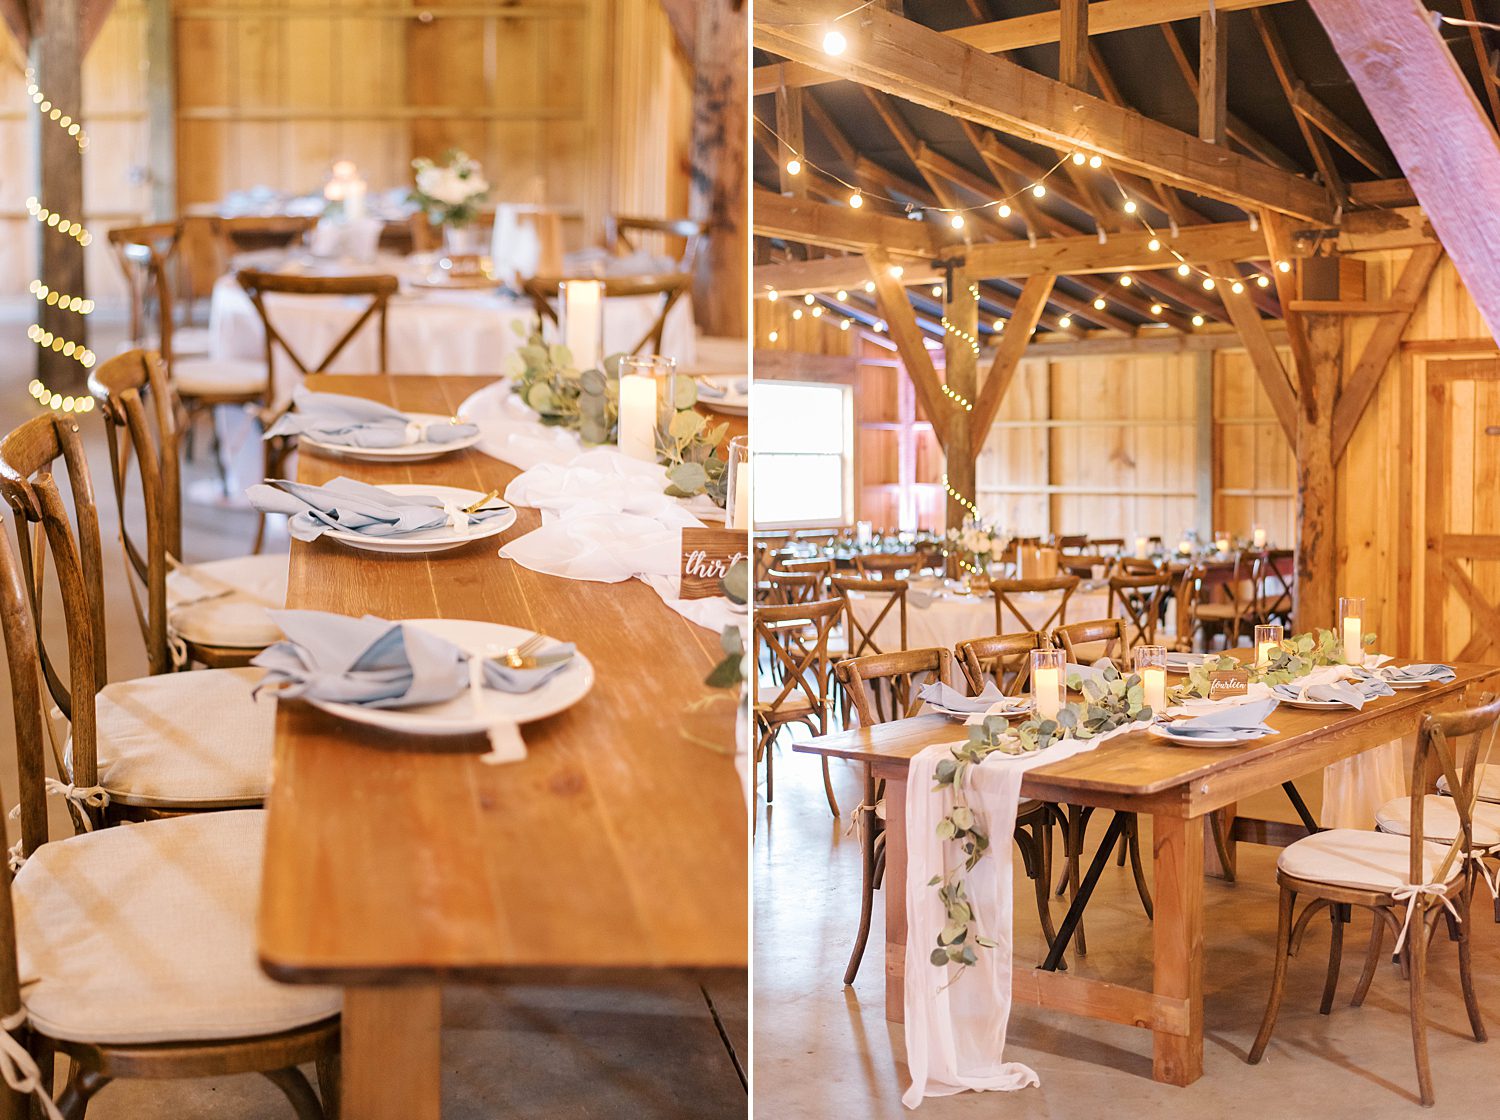 wedding reception with family style seating and lace runner on table at The Barn at Lone Oak Acres